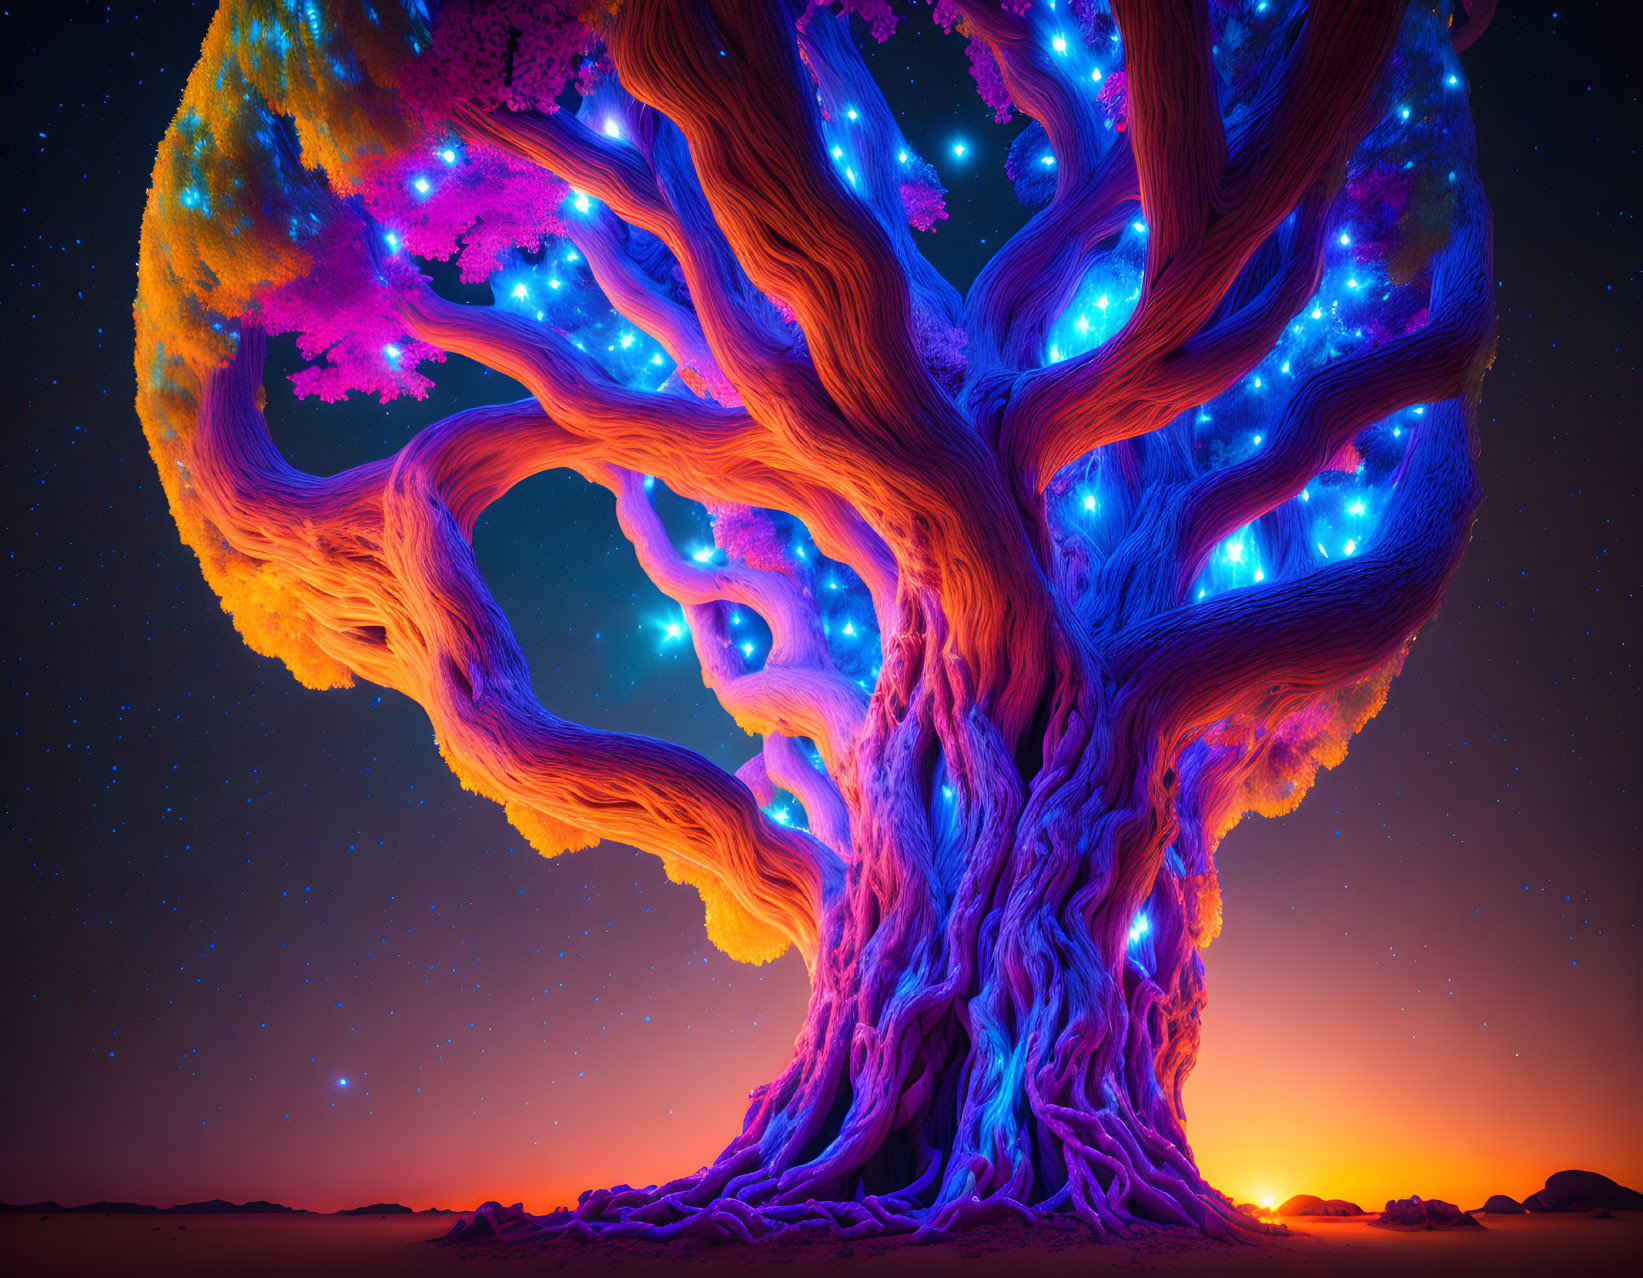 Colorful digital artwork: Tree in blue and purple hues under starry sky & warm sunset.